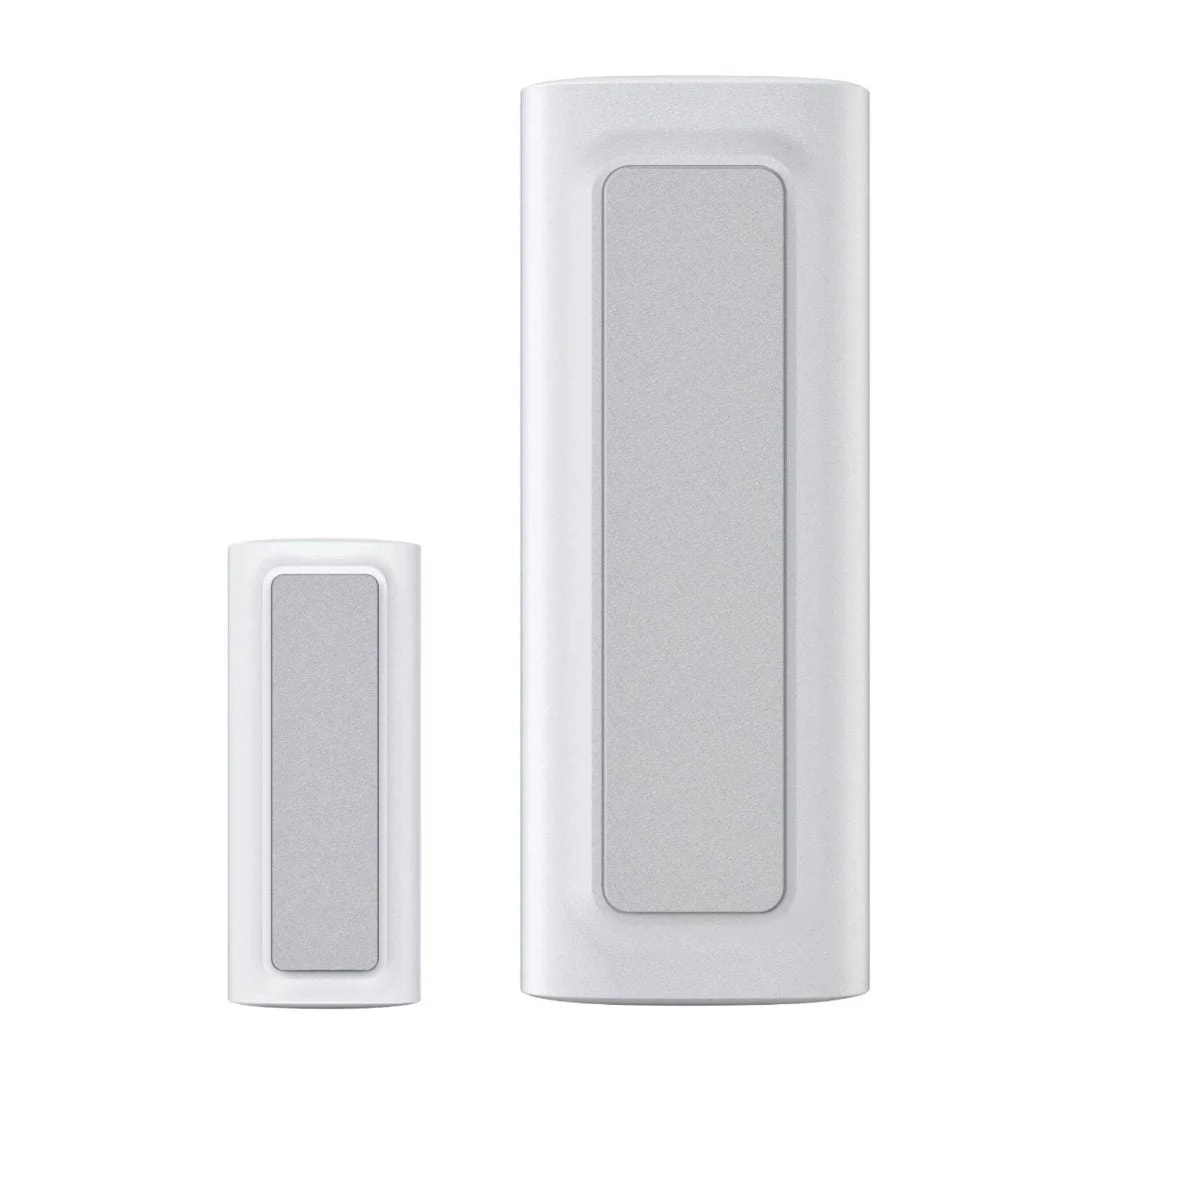 6416786 Rd Scaled Eufy &Lt;H1&Gt;Eufy Smart Home Security Entry Sensor And Motion Sensor Add-On&Lt;/H1&Gt; Https://Www.youtube.com/Watch?V=Flmc4Re0Hbk &Lt;Div Class=&Quot;List-Row&Quot;&Gt; 2 Years Battery Life One Battery Provides 800 Days Of Monitoring. &Lt;/Div&Gt; &Lt;Div Class=&Quot;List-Row&Quot; Style=&Quot;Text-Align: Left;&Quot;&Gt; &Lt;P Class=&Quot;Feature-Title Body-Copy V-Fw-Medium&Quot;&Gt;For Doors And Windowscompact And Versatile Design Fits Onto Any Door Or Window Frame. Requires Eufy Security Homebase.&Lt;/P&Gt; &Lt;/Div&Gt; &Lt;Div Class=&Quot;List-Row&Quot; Style=&Quot;Text-Align: Left;&Quot;&Gt; &Lt;P Class=&Quot;Feature-Title Body-Copy V-Fw-Medium&Quot;&Gt;100 Decibel Sirenenable Or Disable Siren Protection, Which Triggers A 100-Decibel Siren On Homebase, And Sends An Alert To Your Smartphone When Forced Entry Is Detected.&Lt;/P&Gt; &Lt;/Div&Gt; &Lt;Div Class=&Quot;List-Row&Quot;&Gt; &Lt;P Class=&Quot;Feature-Title Body-Copy V-Fw-Medium&Quot; Style=&Quot;Text-Align: Left;&Quot;&Gt;Easy Installationjust Peel Off The Mounting Tape And Stick Or Screw The Sensor Onto The Door Or Window You Want To Monitor.&Lt;/P&Gt; &Lt;/Div&Gt; &Lt;Div Class=&Quot;List-Row&Quot;&Gt; &Lt;P Class=&Quot;Body-Copy&Quot;&Gt;&Lt;Strong&Gt;Note: Eufy Security Homebase Is Required (Sold Separately).&Lt;/Strong&Gt;&Lt;/P&Gt; &Lt;/Div&Gt; Entry Sensor Eufy Smart Home Security Entry Sensor Add-On T89000D4